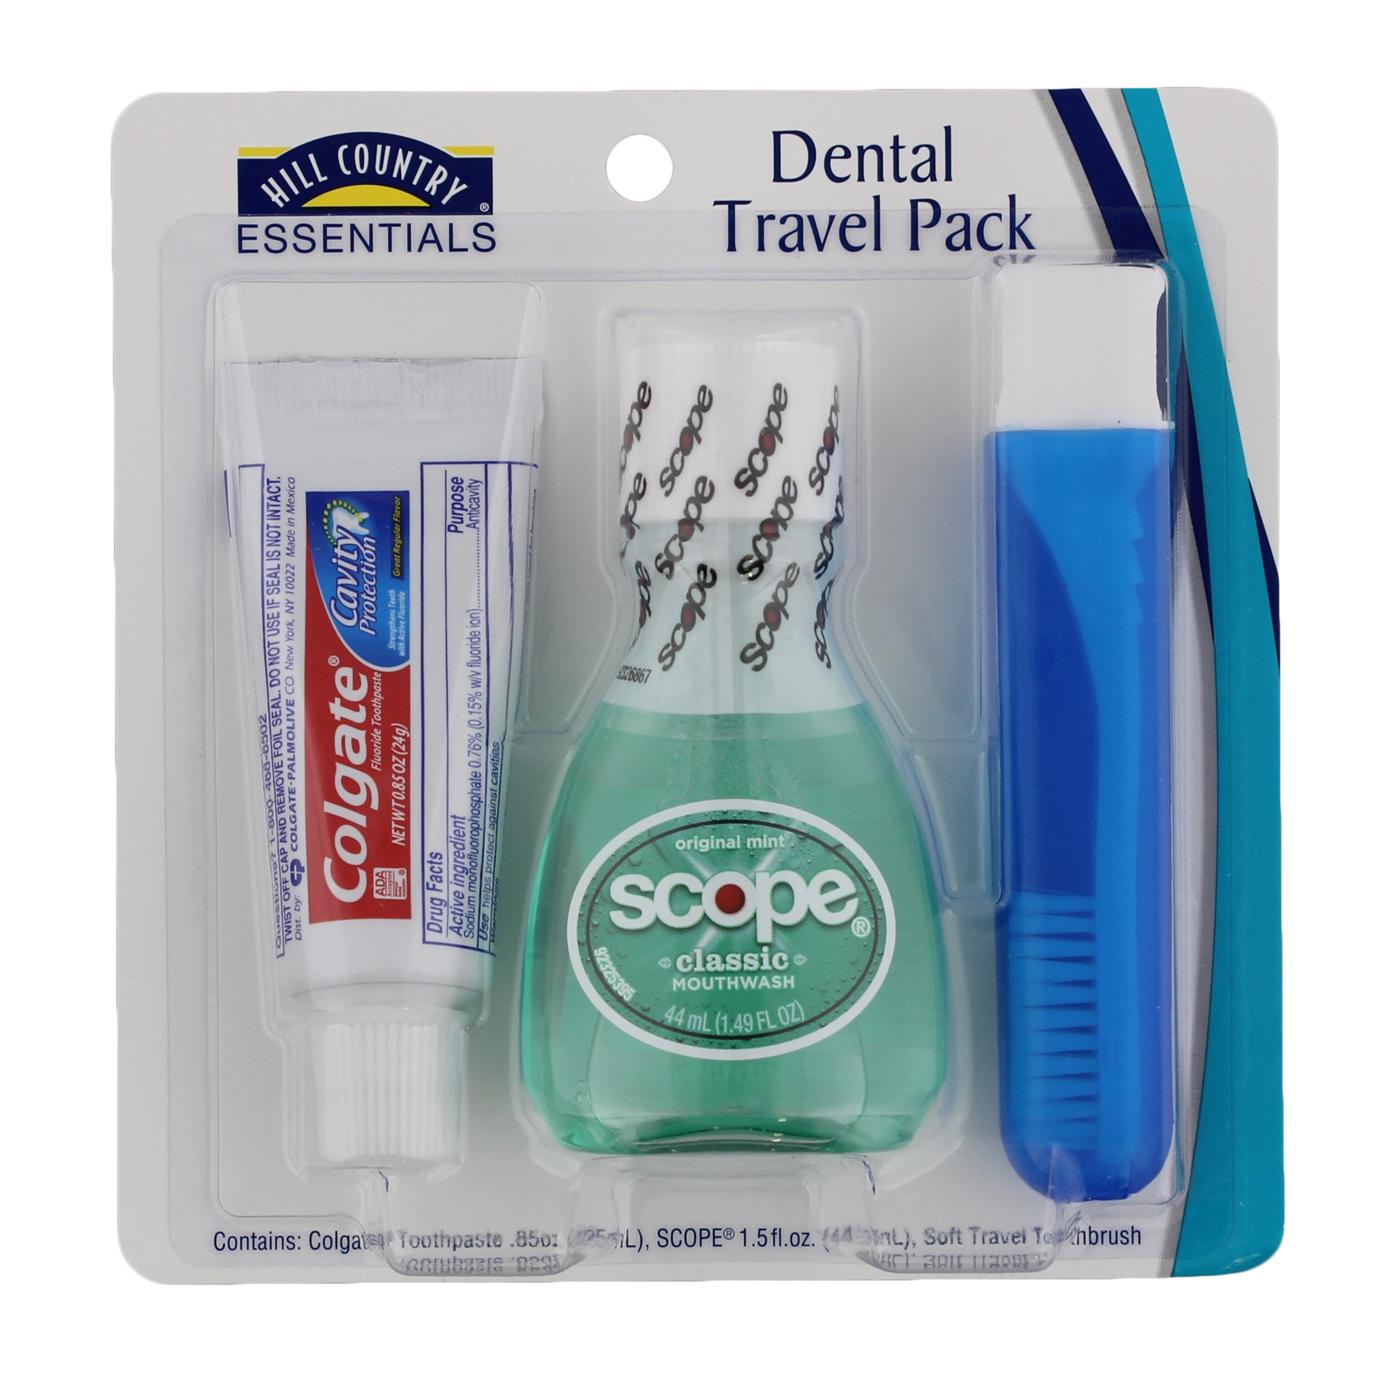 Hill Country Essentials Travel Size Dental Pack - Assorted; image 5 of 5